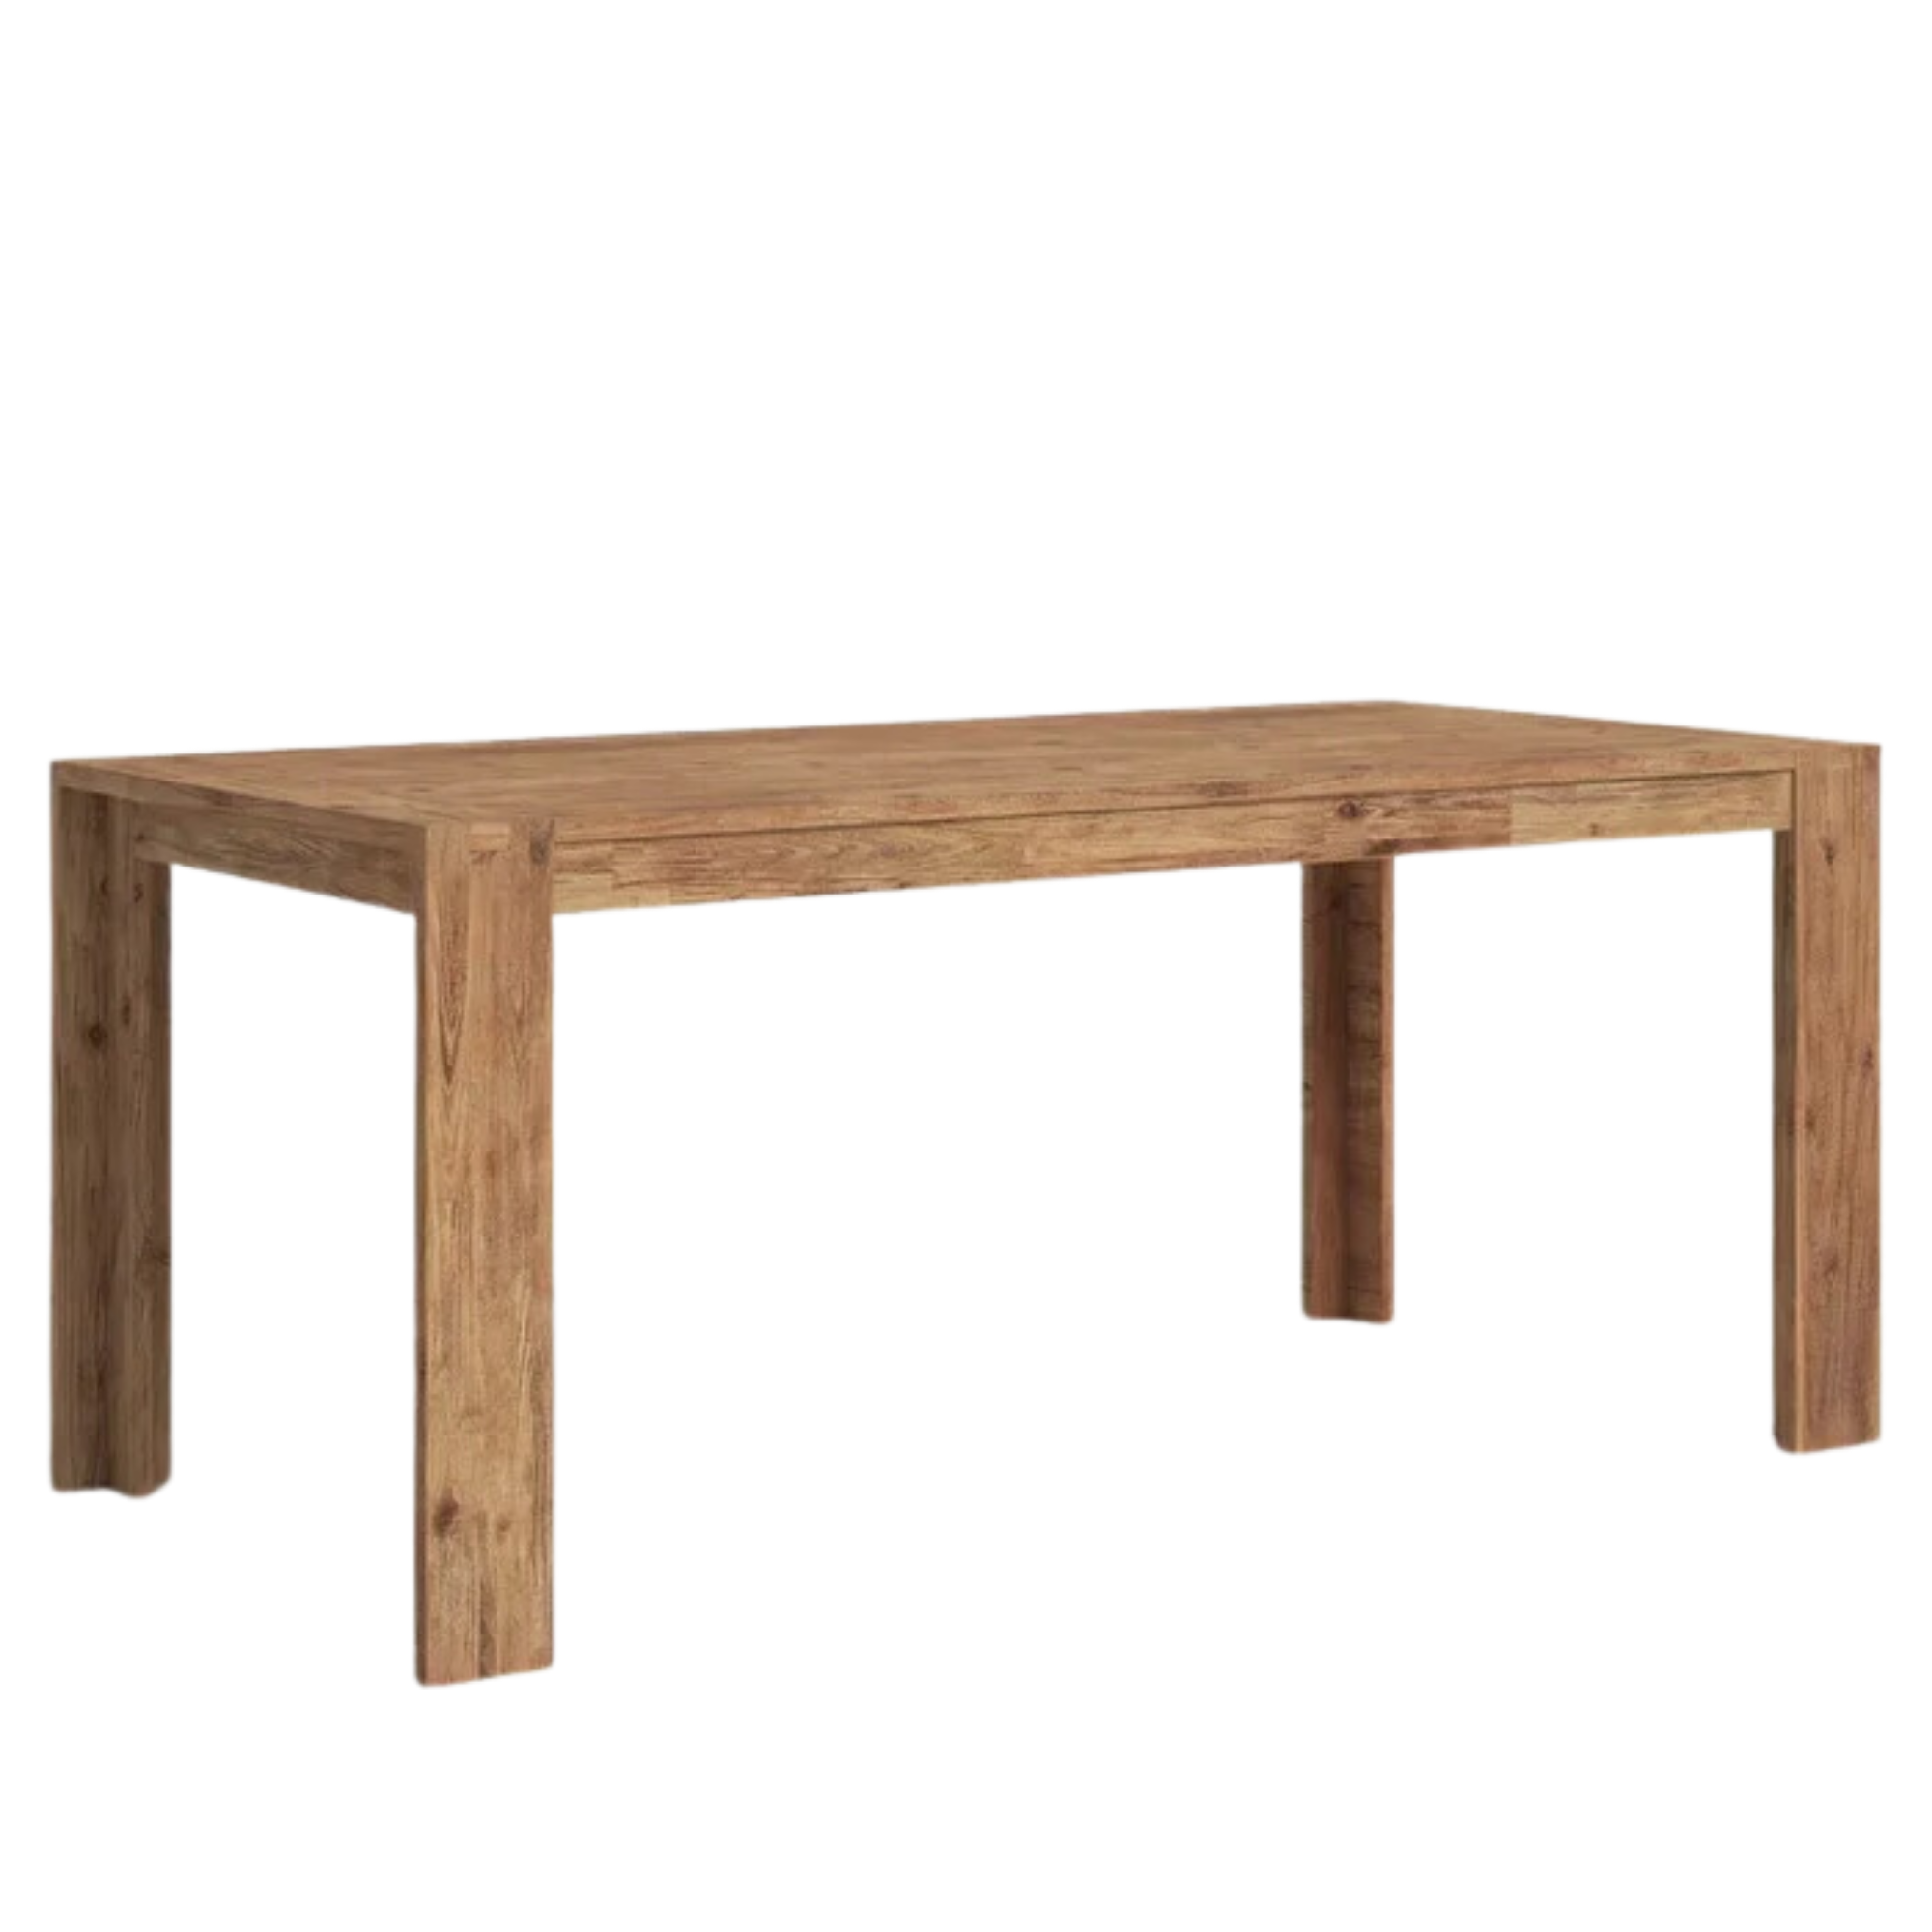 Lida Wooden Dining Table